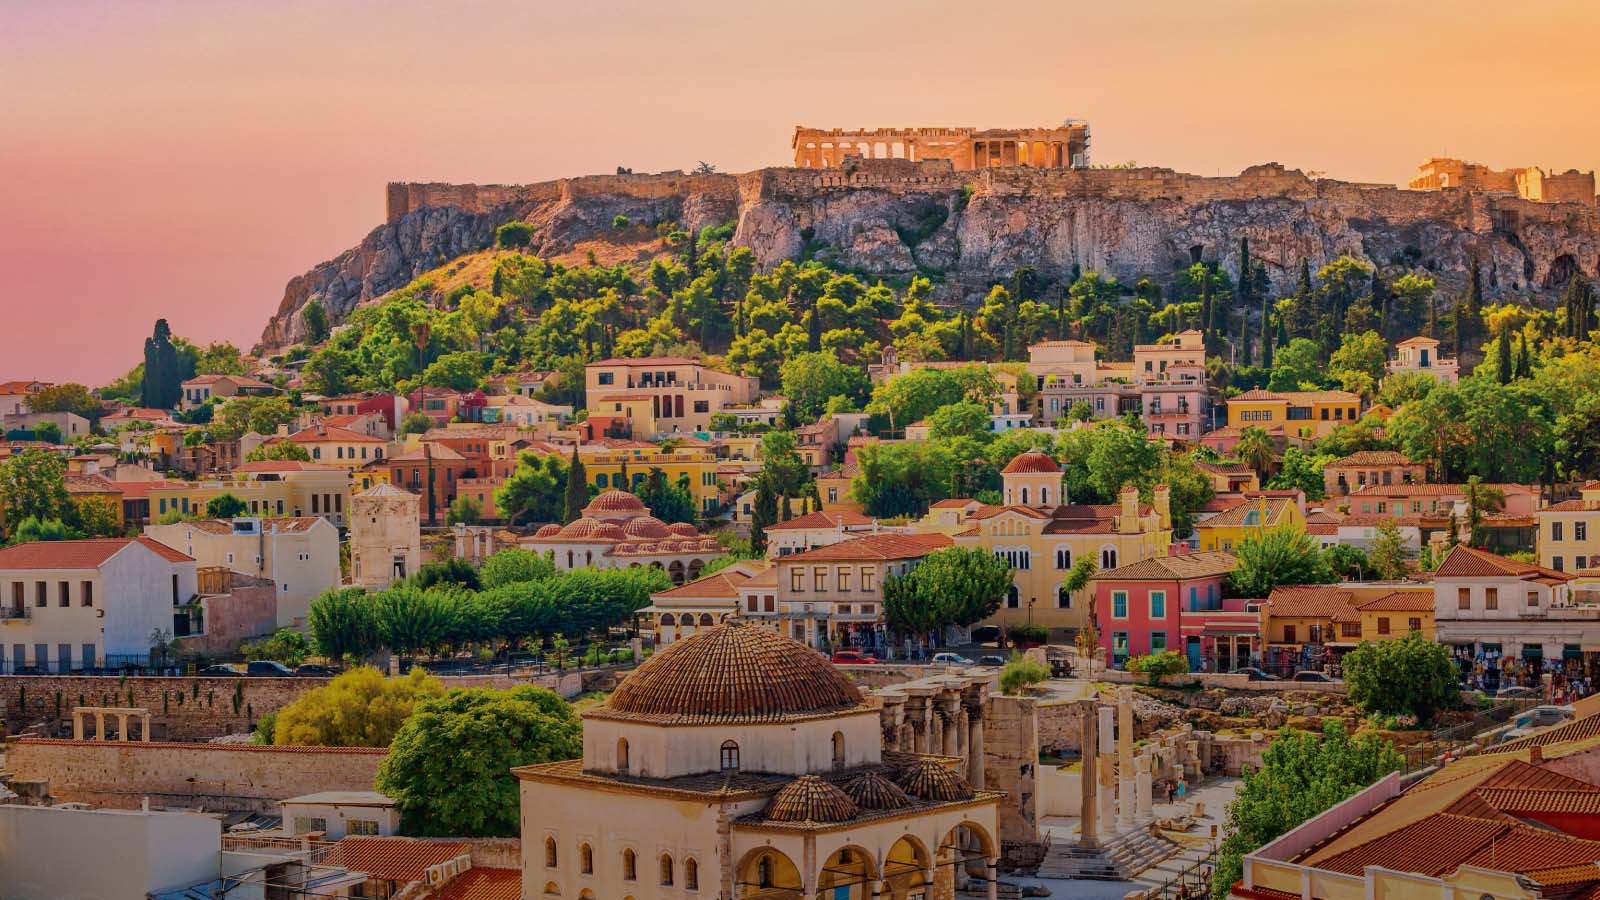 Photograph of Athens from the Acropolis